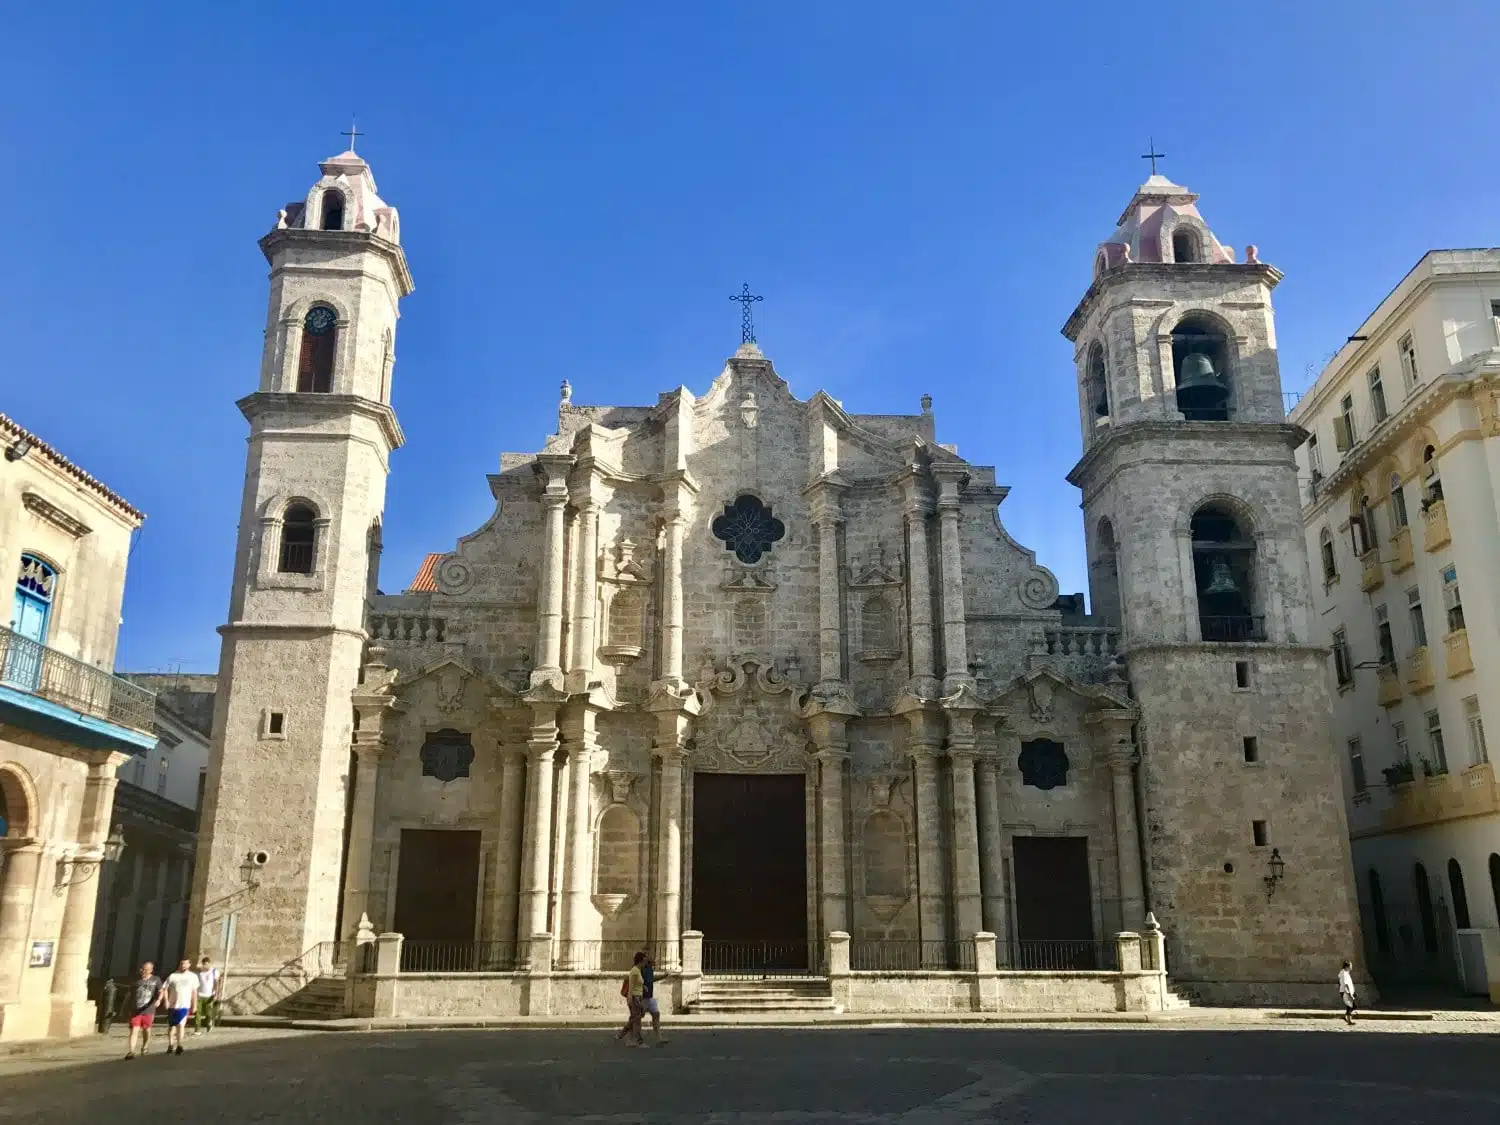 Havana Cathedral is stunning. No way it couldn't feature in our best things to see in Havana guide